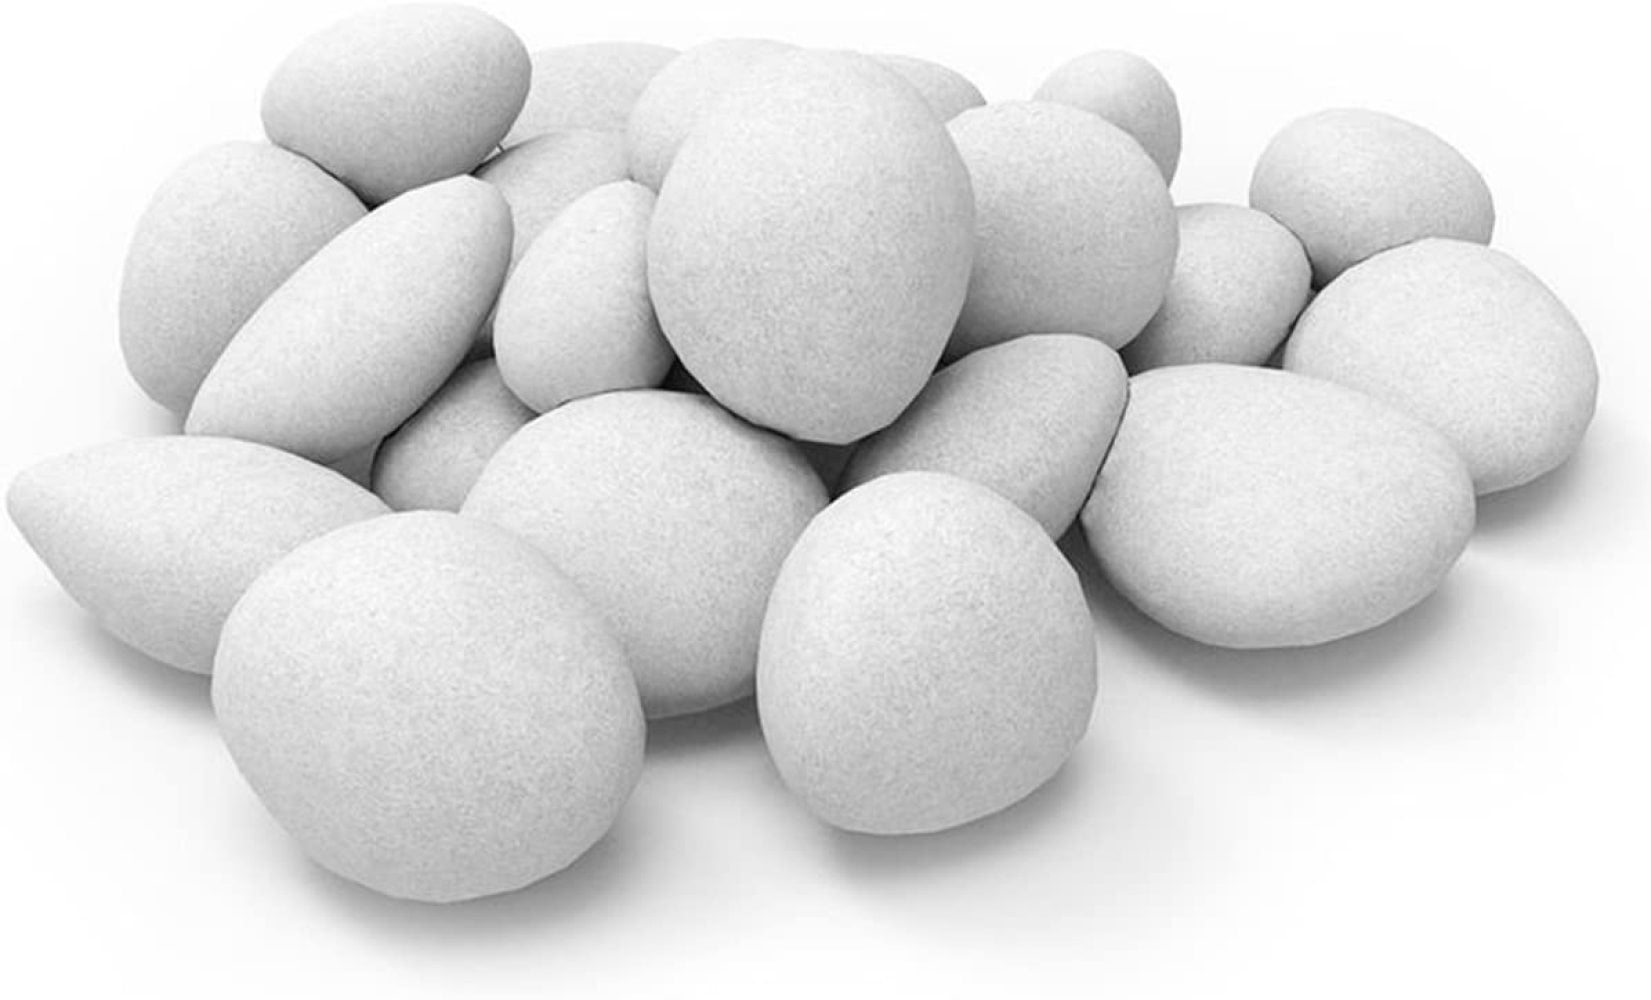 hmleaf 24 PCS Fireplace Ceramic Pebbles for All Types of Indoor Gas Inserts  Ventless & Vent Free Electric or Outdoor Fireplaces & Fire Pits Realistic  Clean Burning Accessories in White - Walmart.com